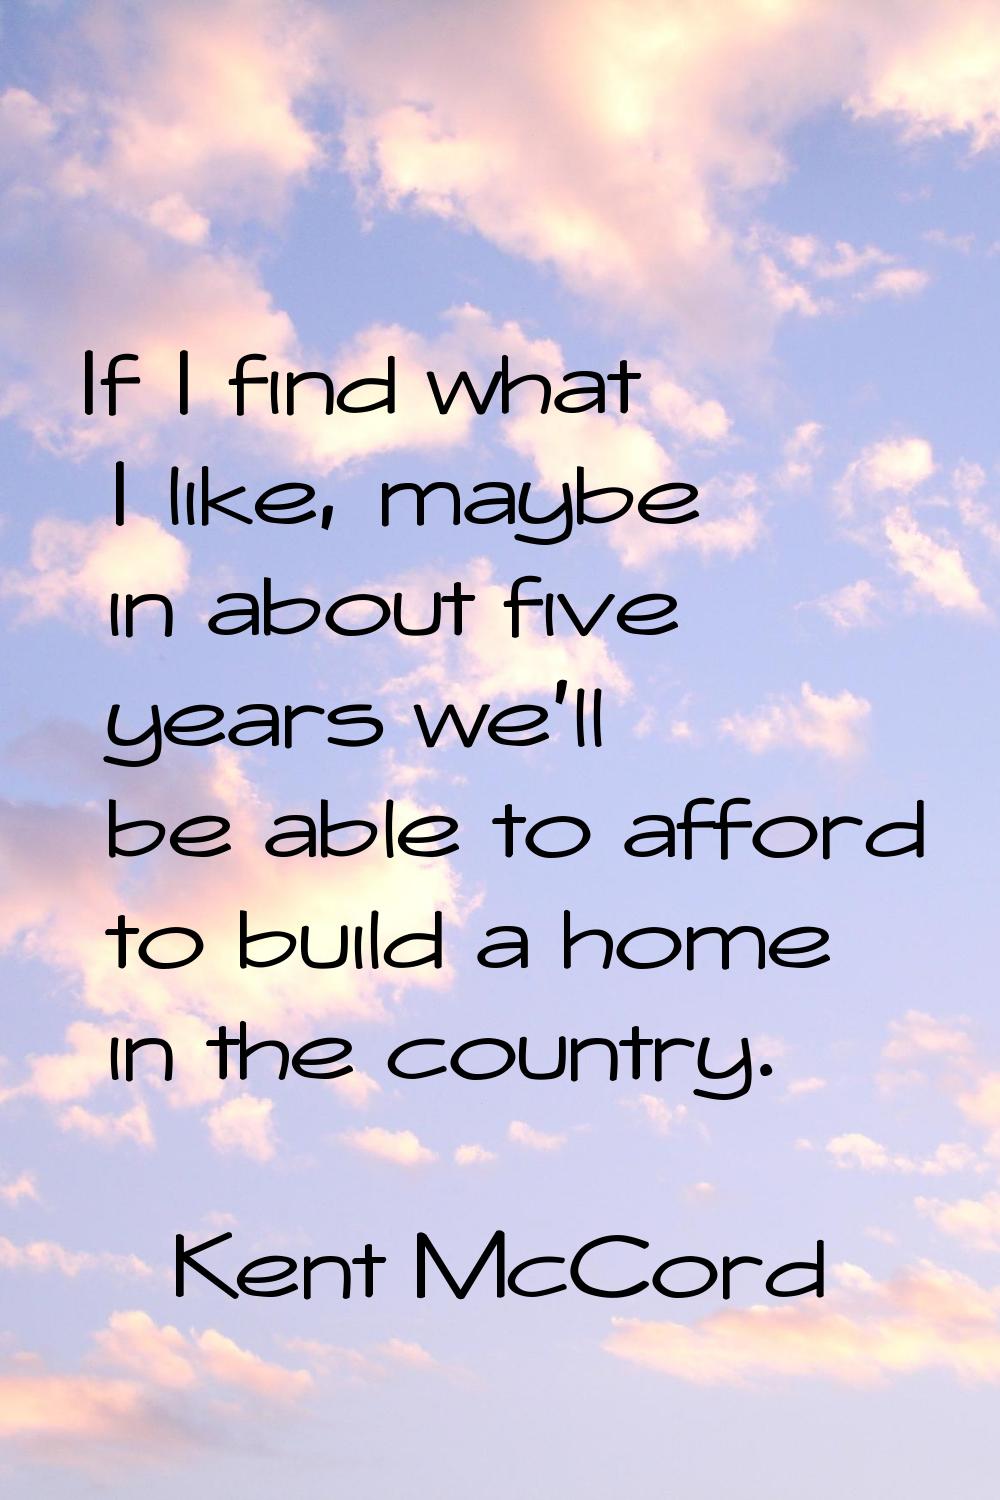 If I find what I like, maybe in about five years we'll be able to afford to build a home in the cou